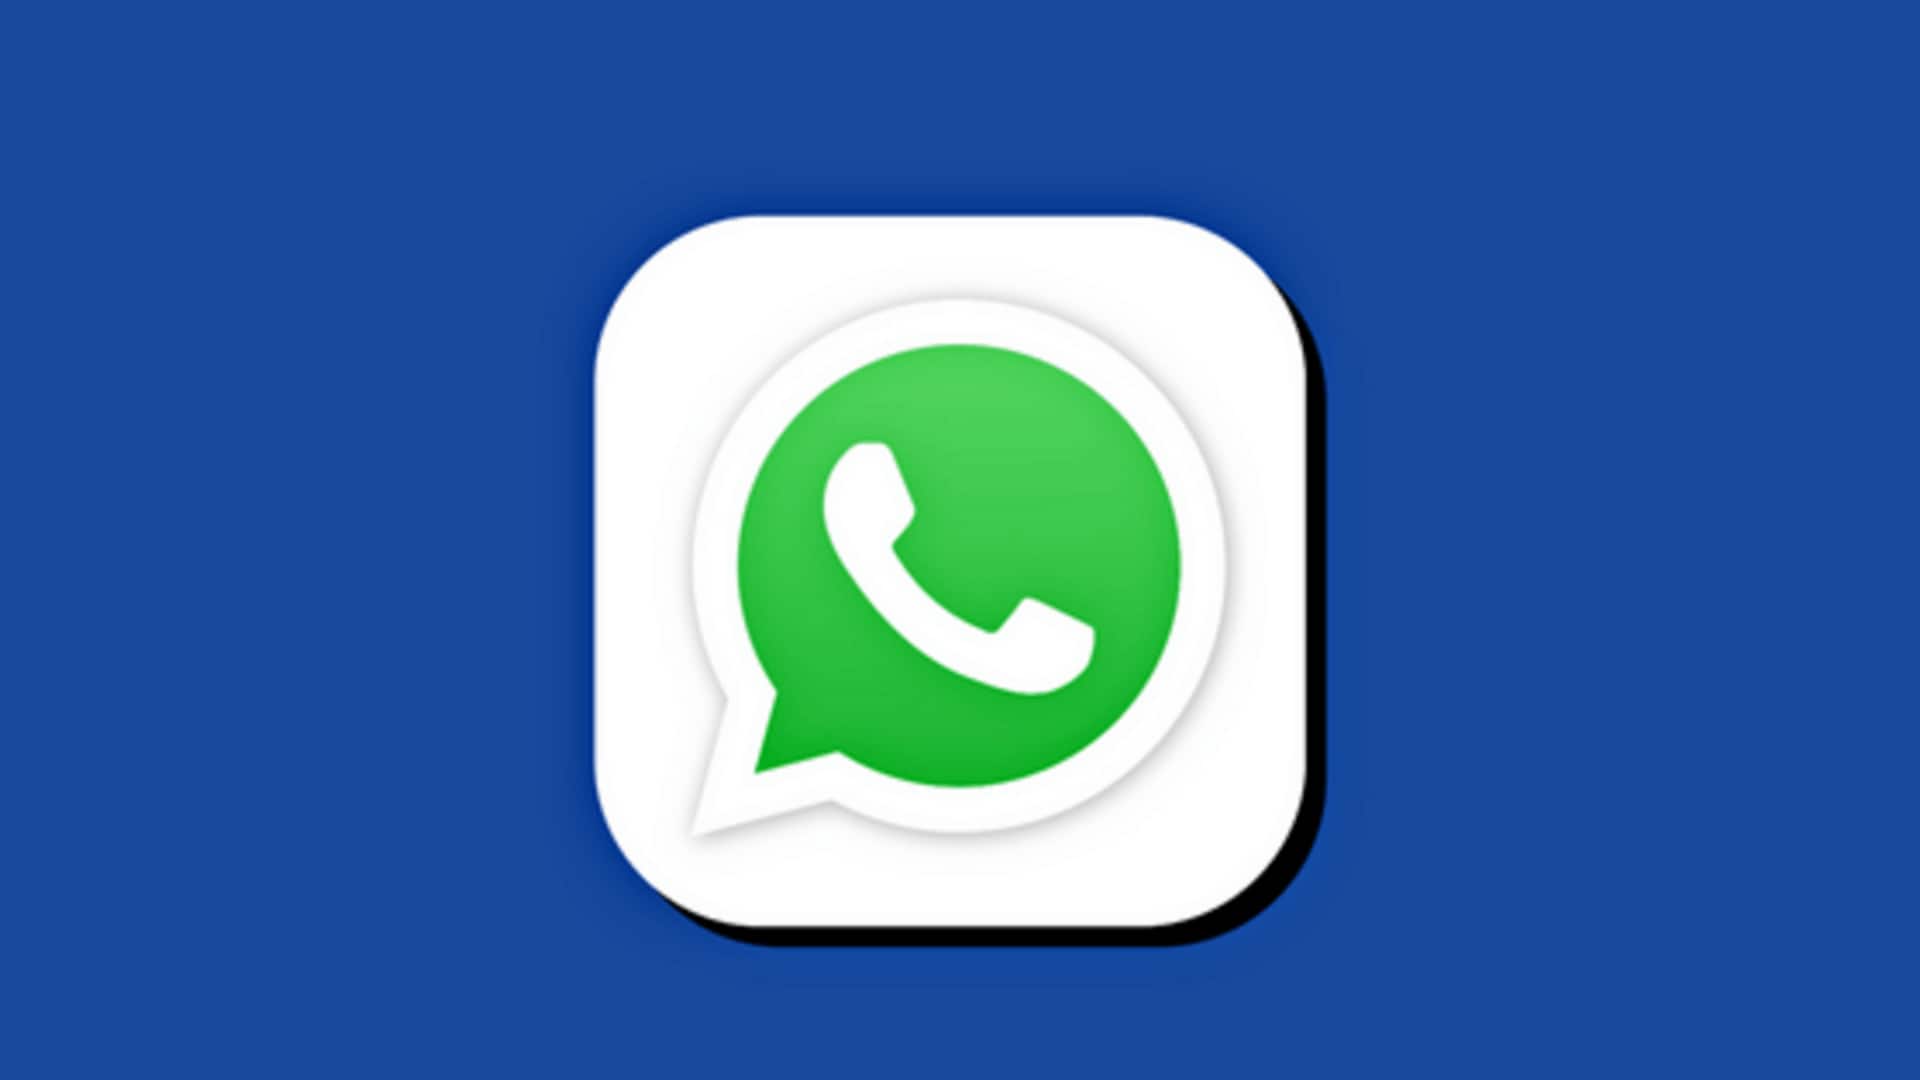 WhatsApp allows Windows users to start chats with unsaved contacts